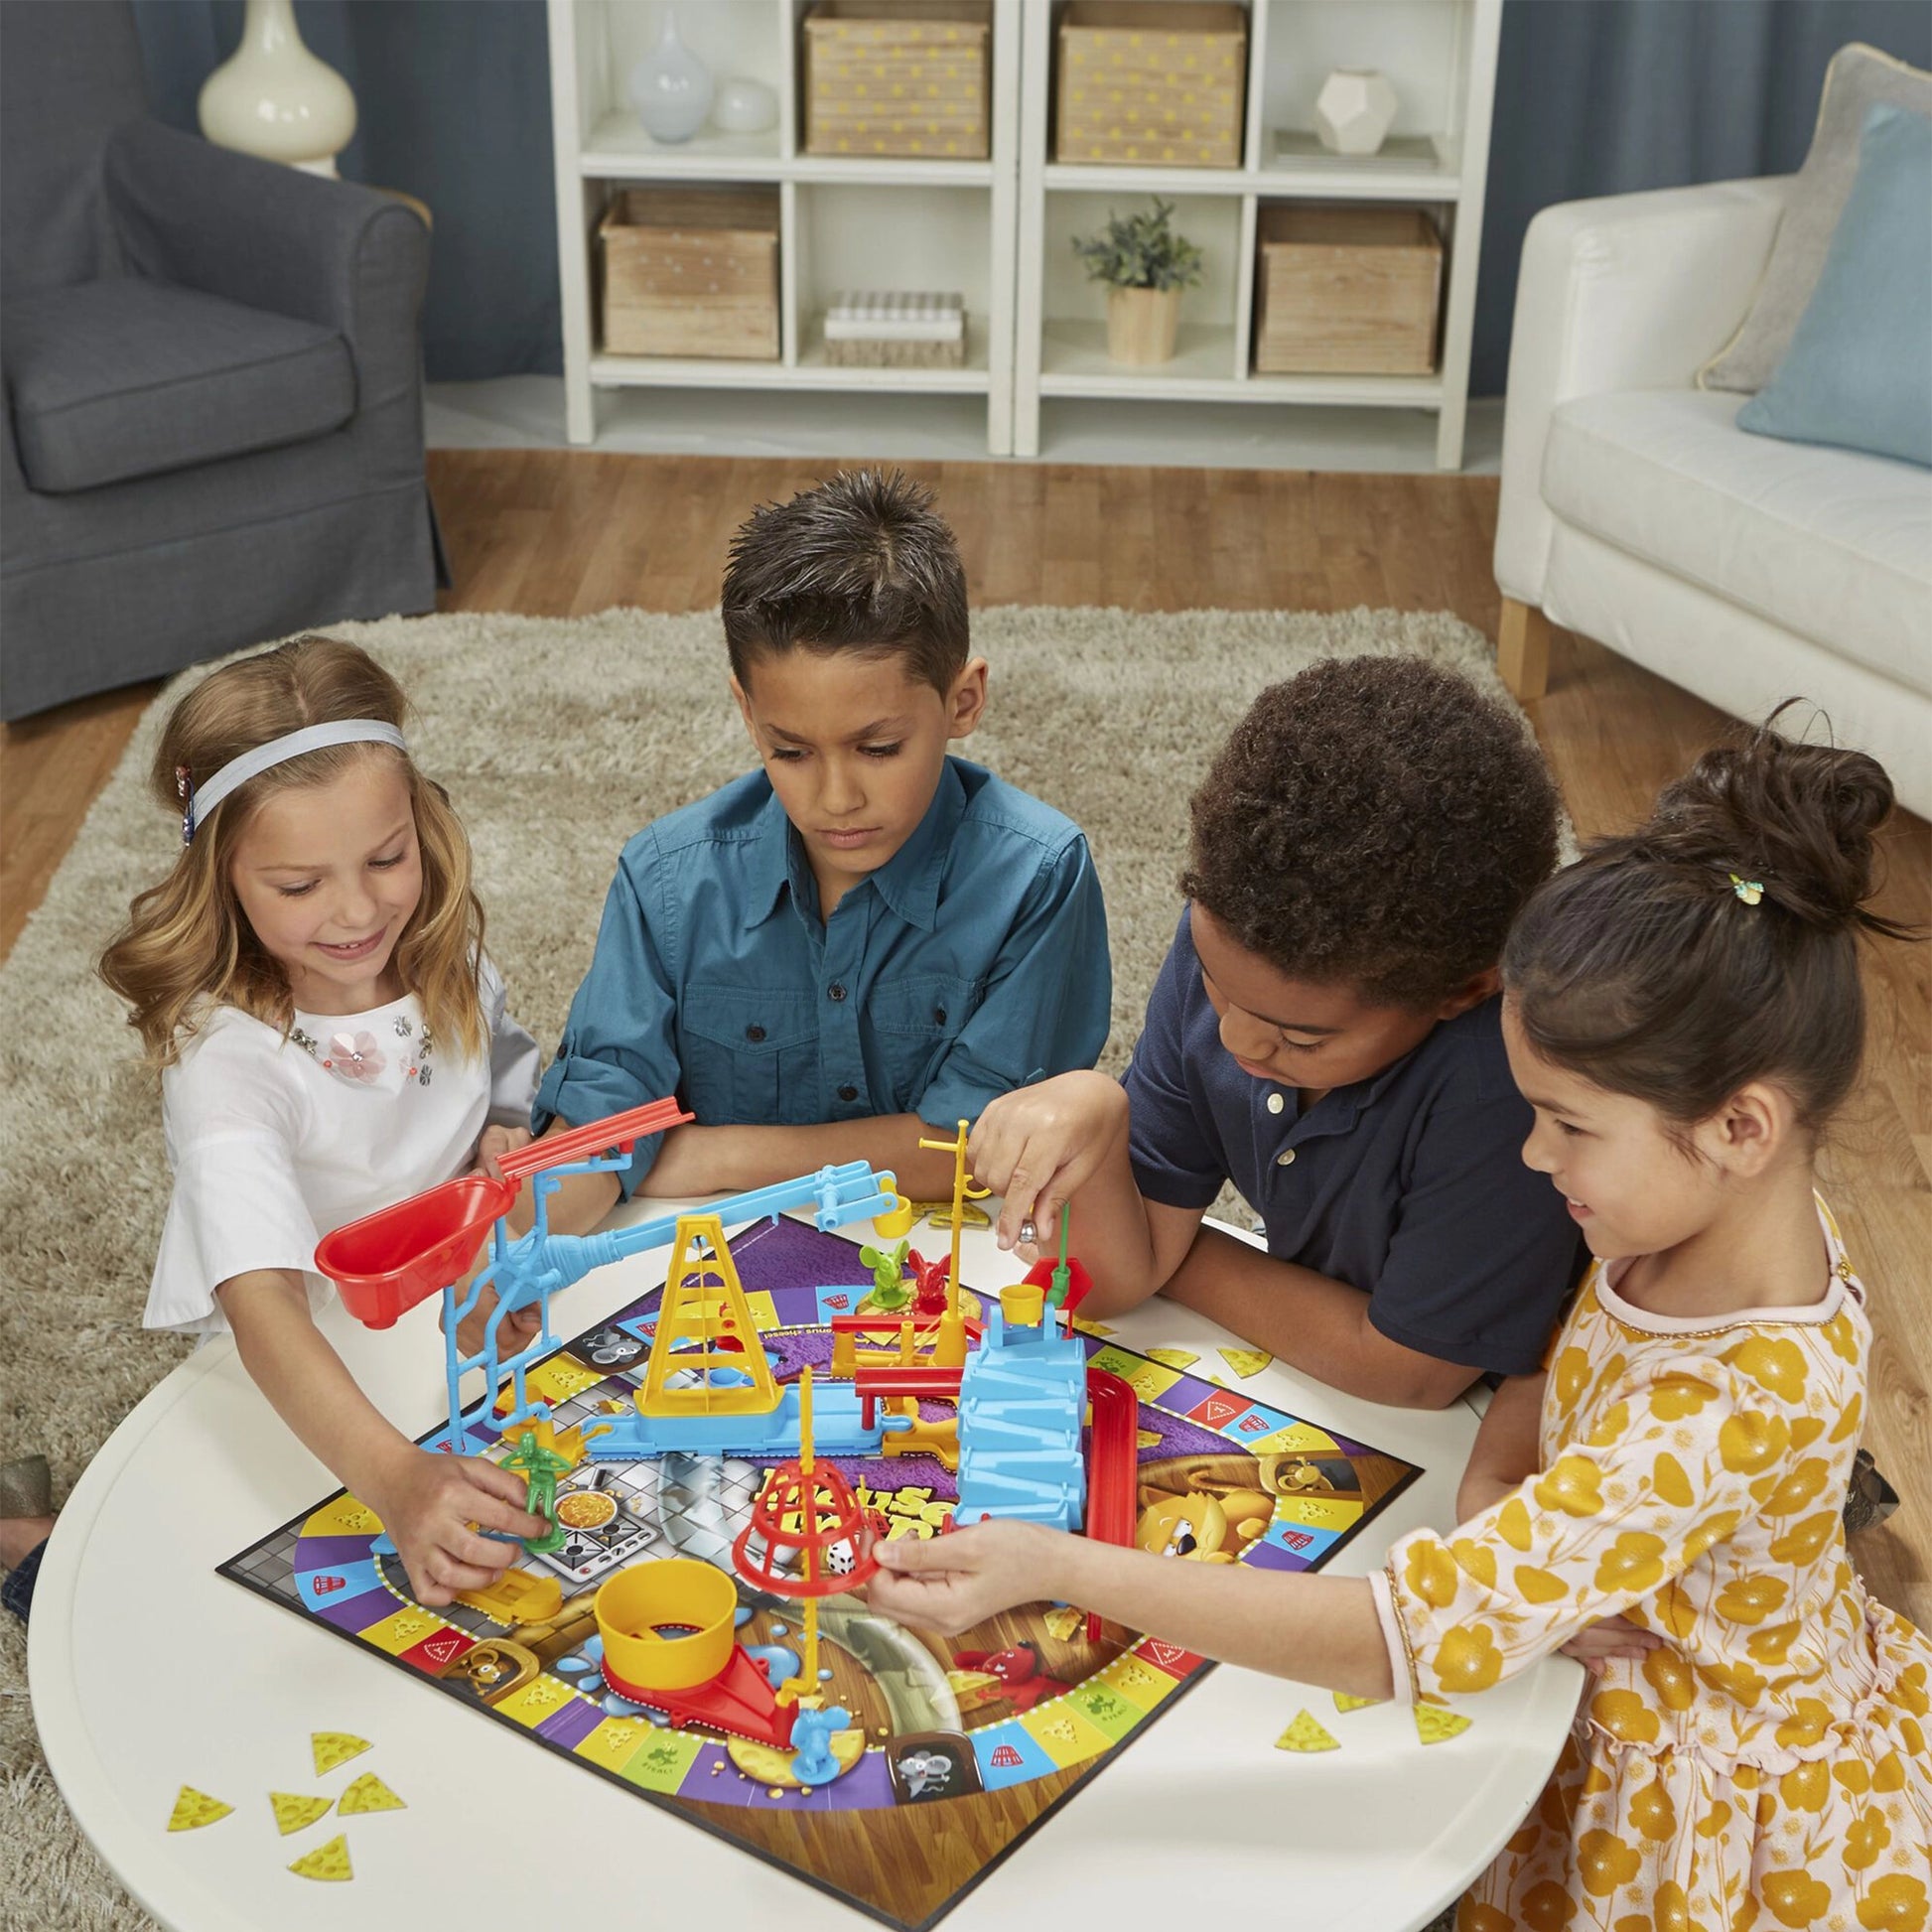 Mouse Trap Kids Board Game